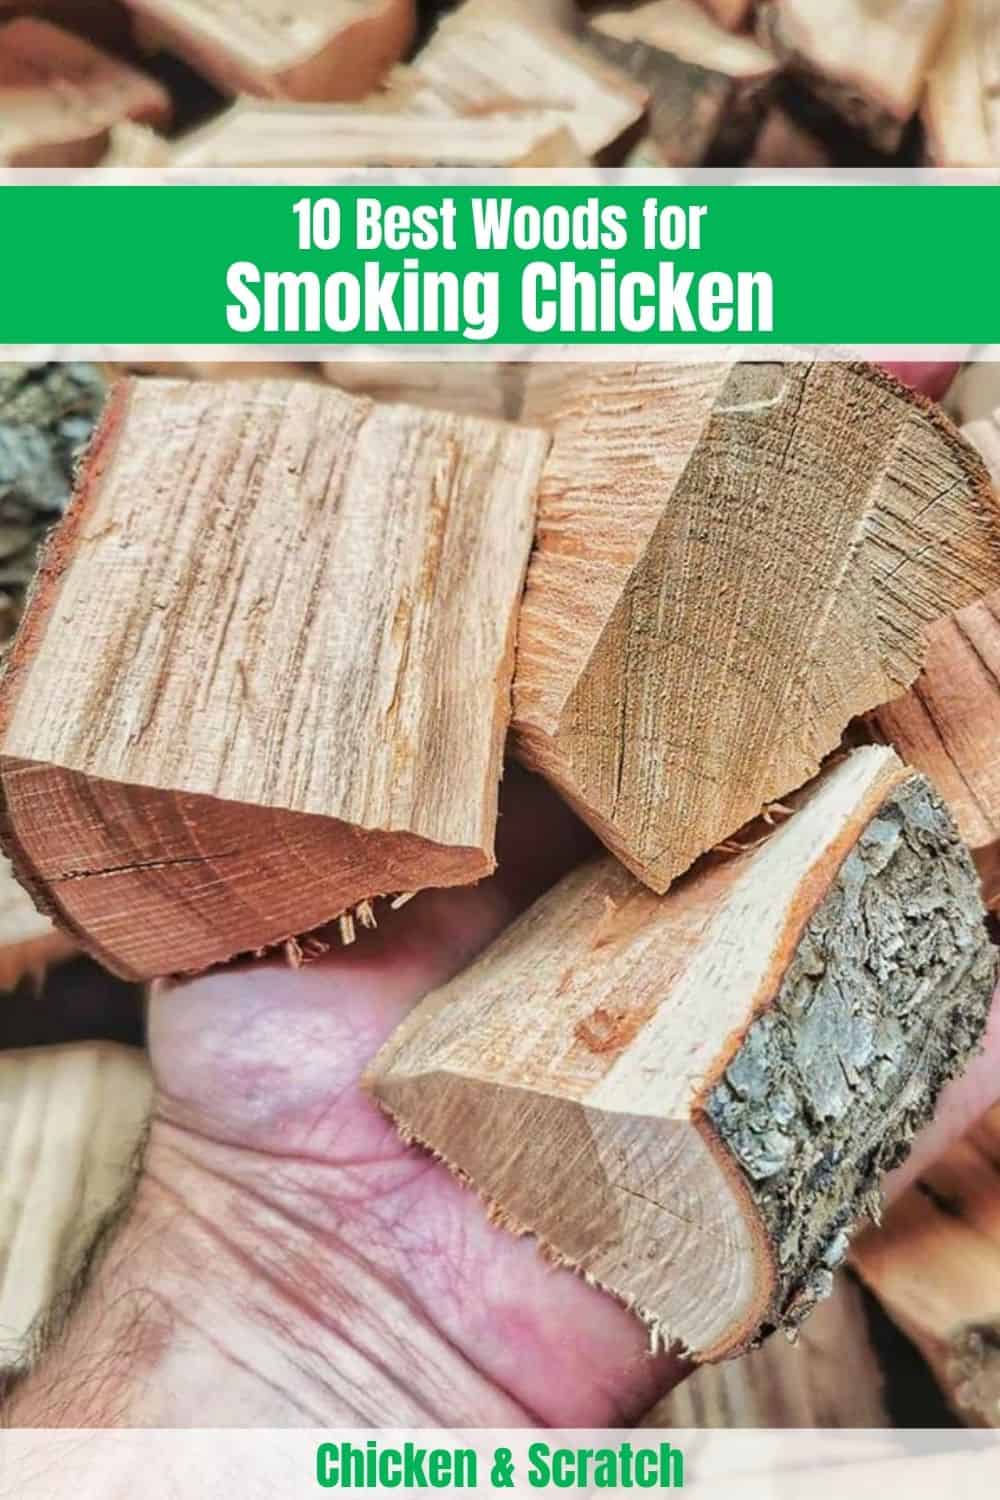 Cherry Wood 12" Logs for Smoking BBQ Grilling Cooking Smoker Priority Shipping 